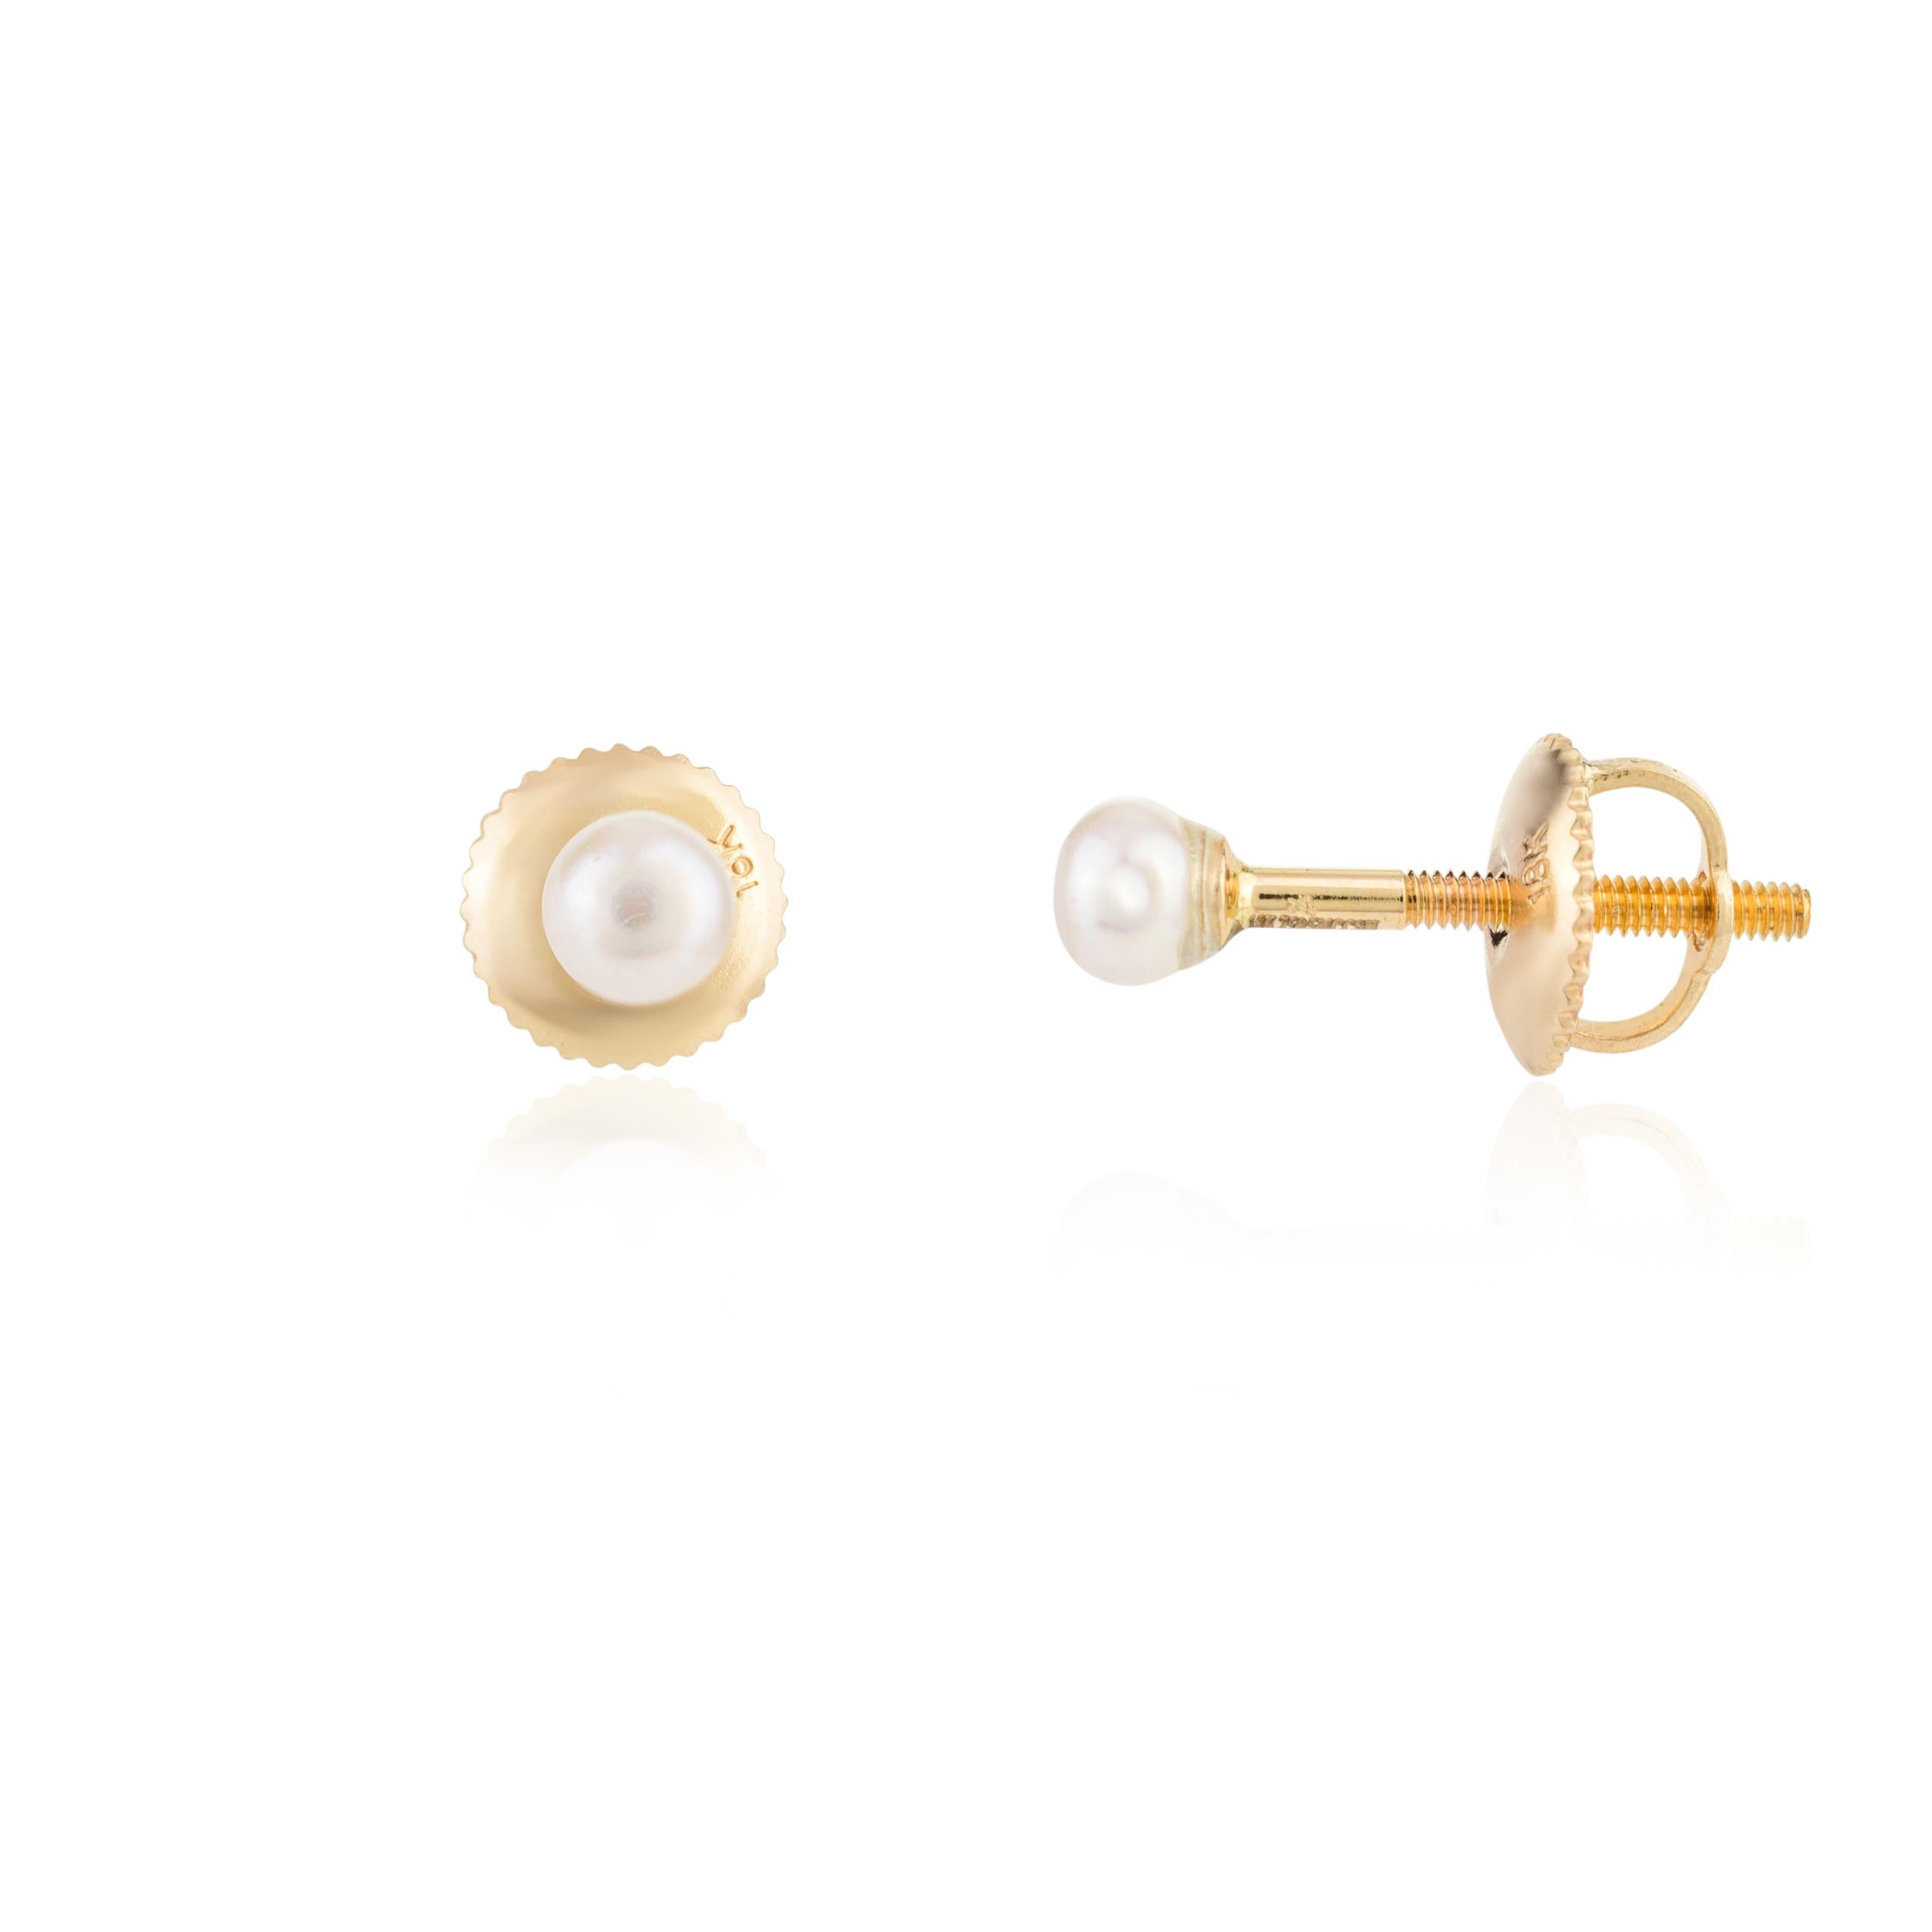 Modern Dainty Everyday Pearl Stud Earrings in 18k Solid Yellow Gold Minimalist Jewelry For Sale